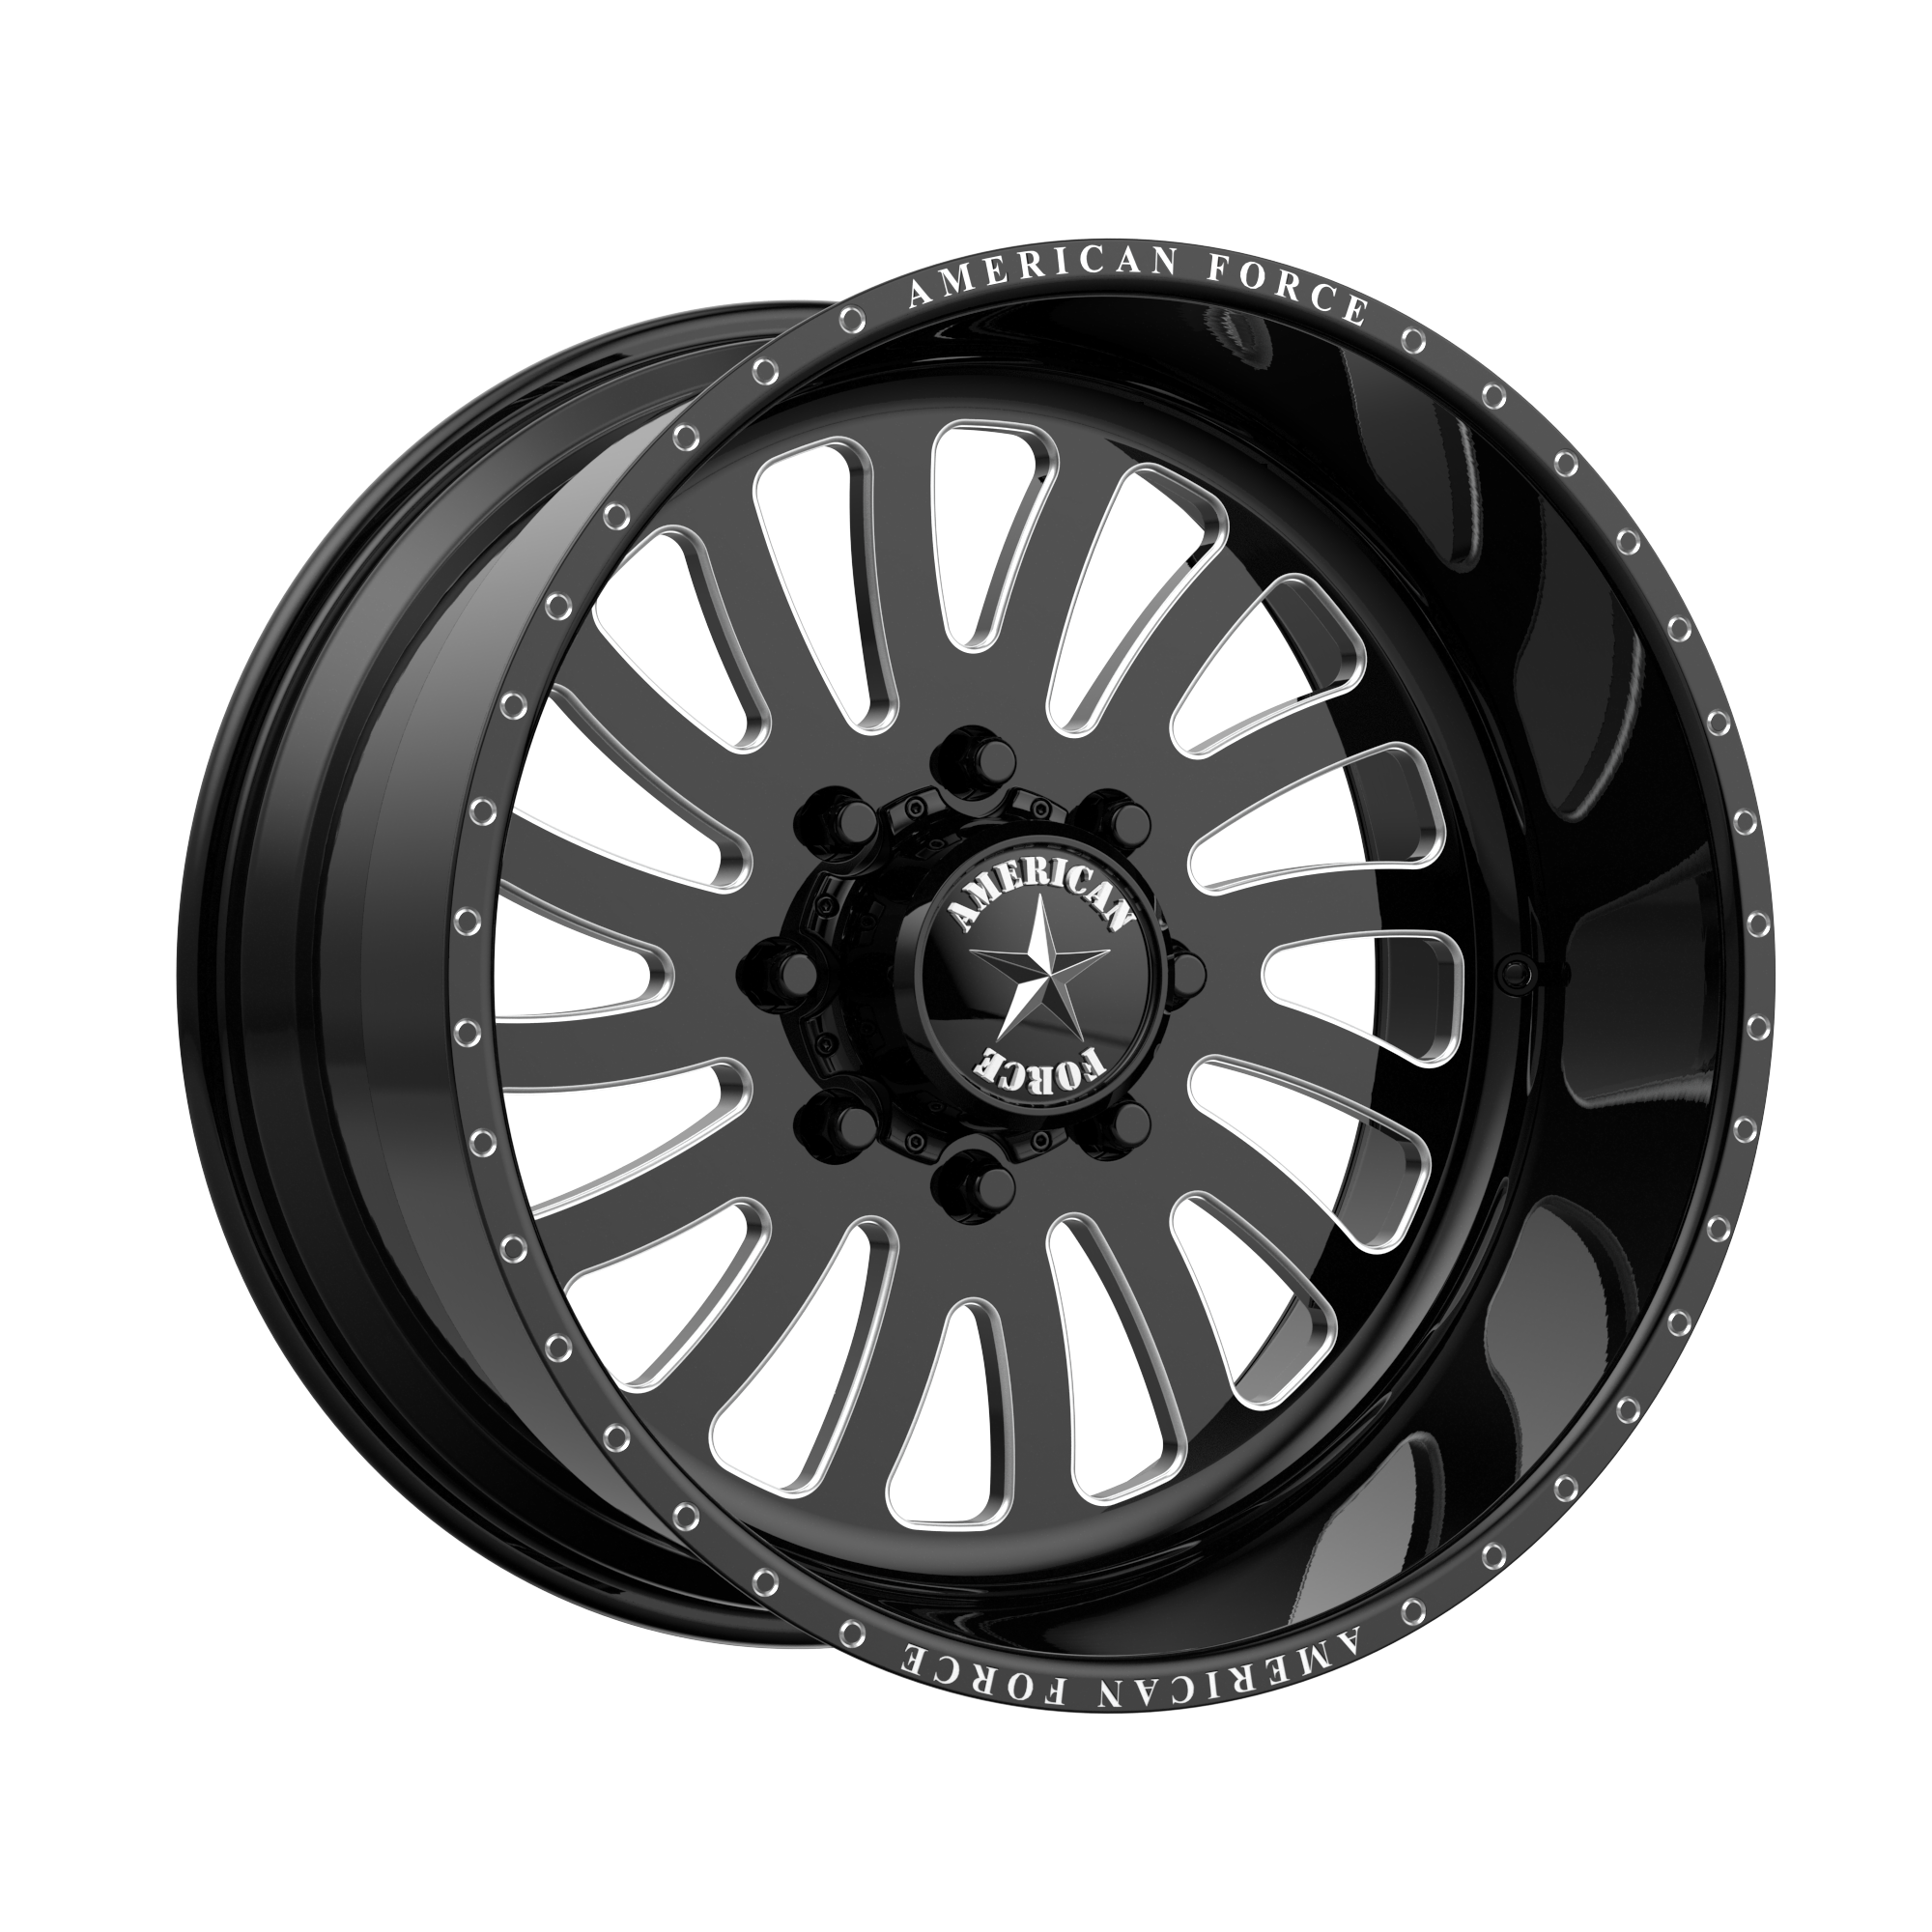 OCTANE SS 22x14 8x180.00 GLOSS BLACK MACHINED (-73 mm) - Tires and Engine Performance